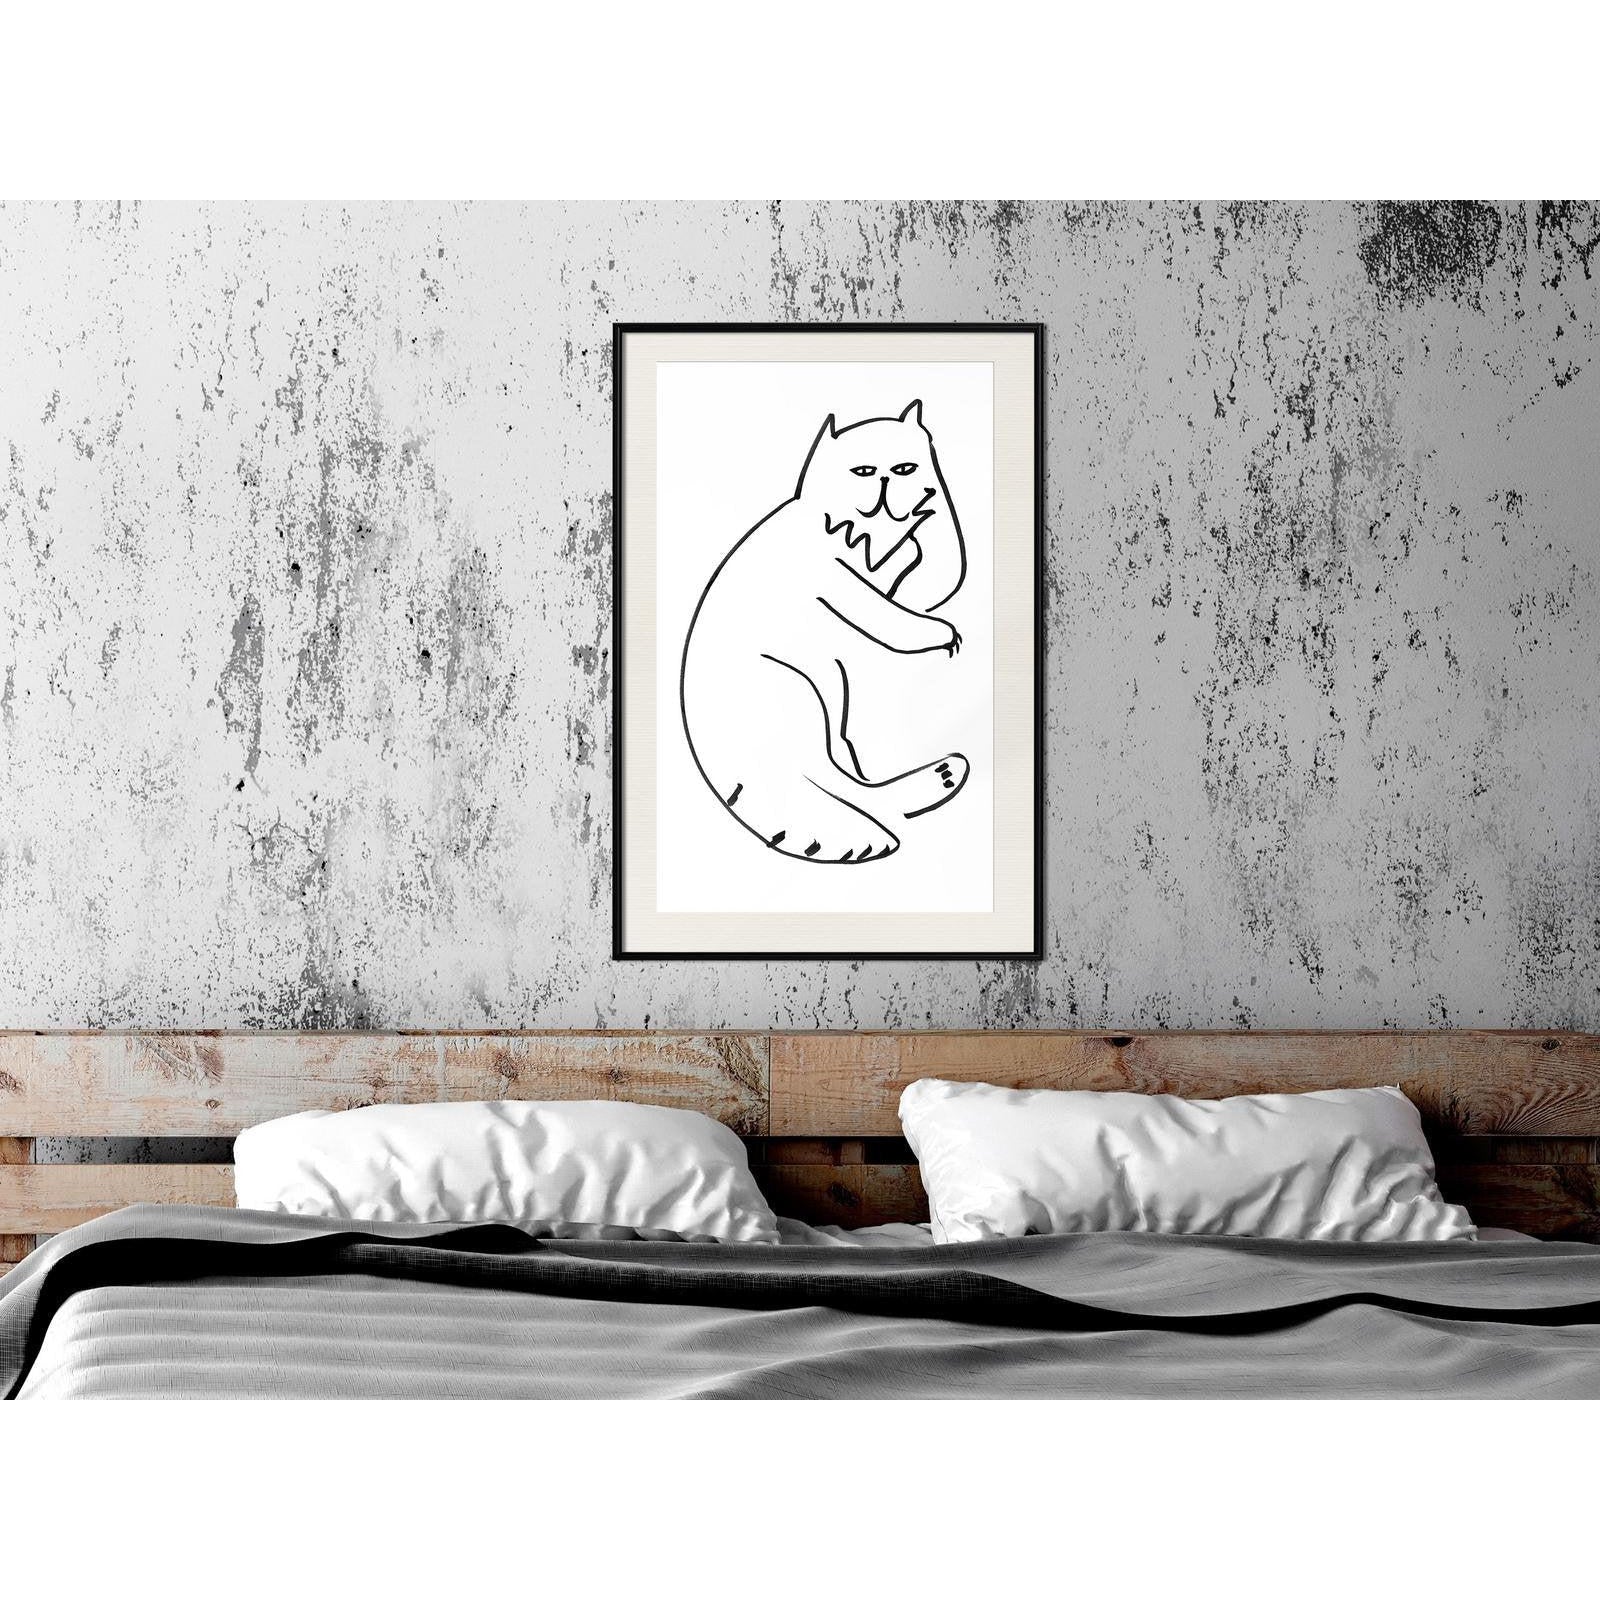 Inramad Poster / Tavla - Fluffy Rest-Poster Inramad-Artgeist-peaceofhome.se